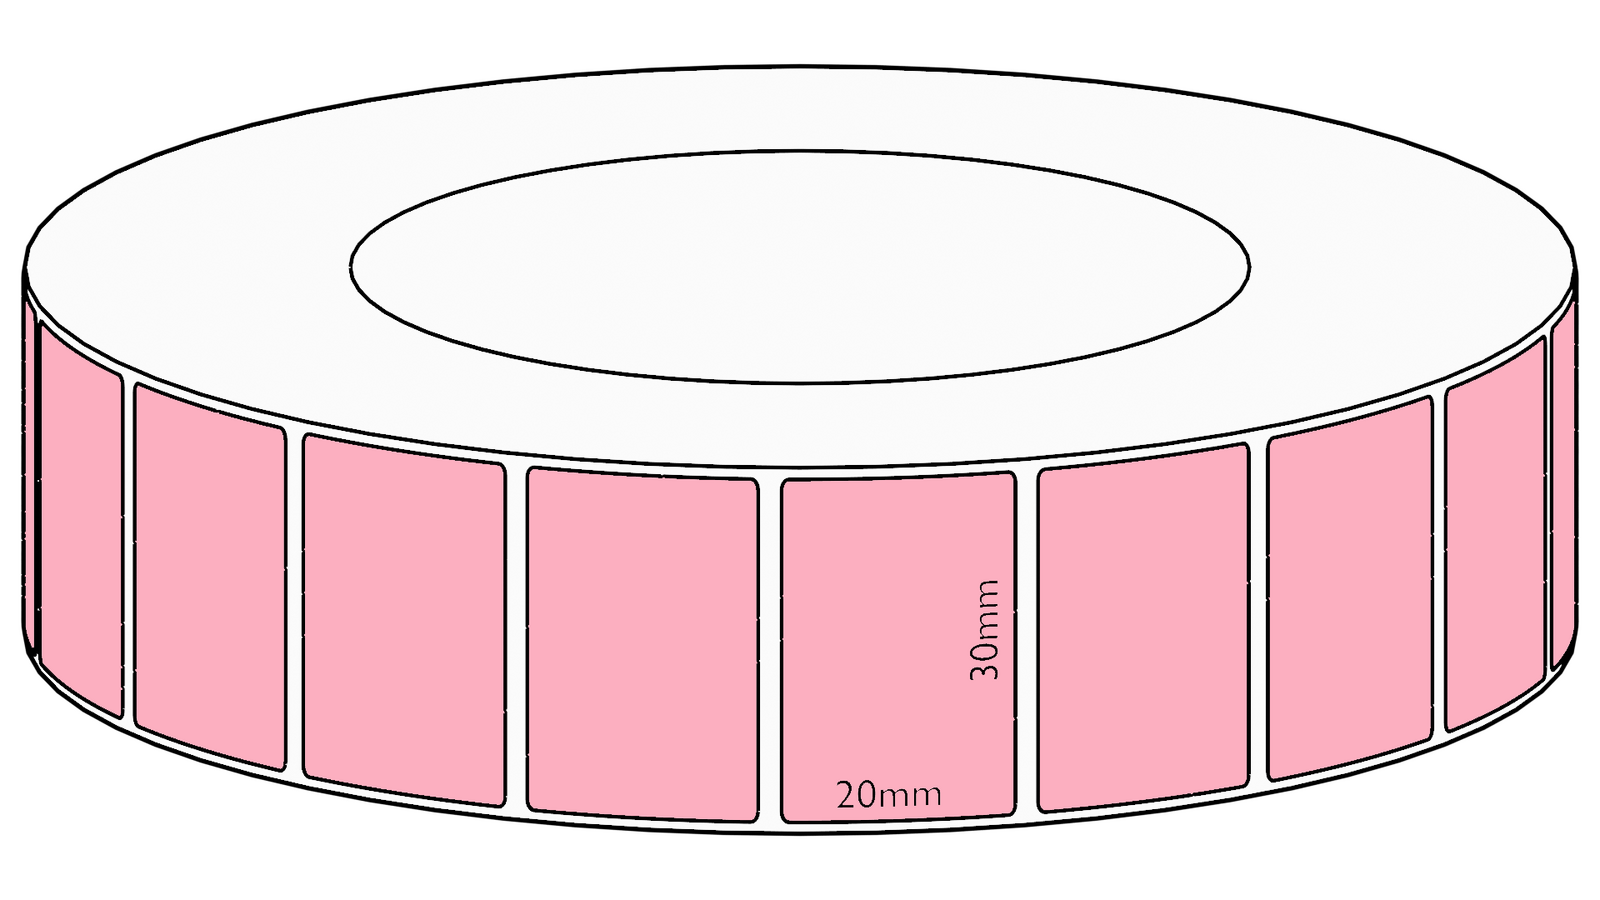 30x20mm Pink Direct Thermal Permanent Label, 6500 per roll, 76mm core